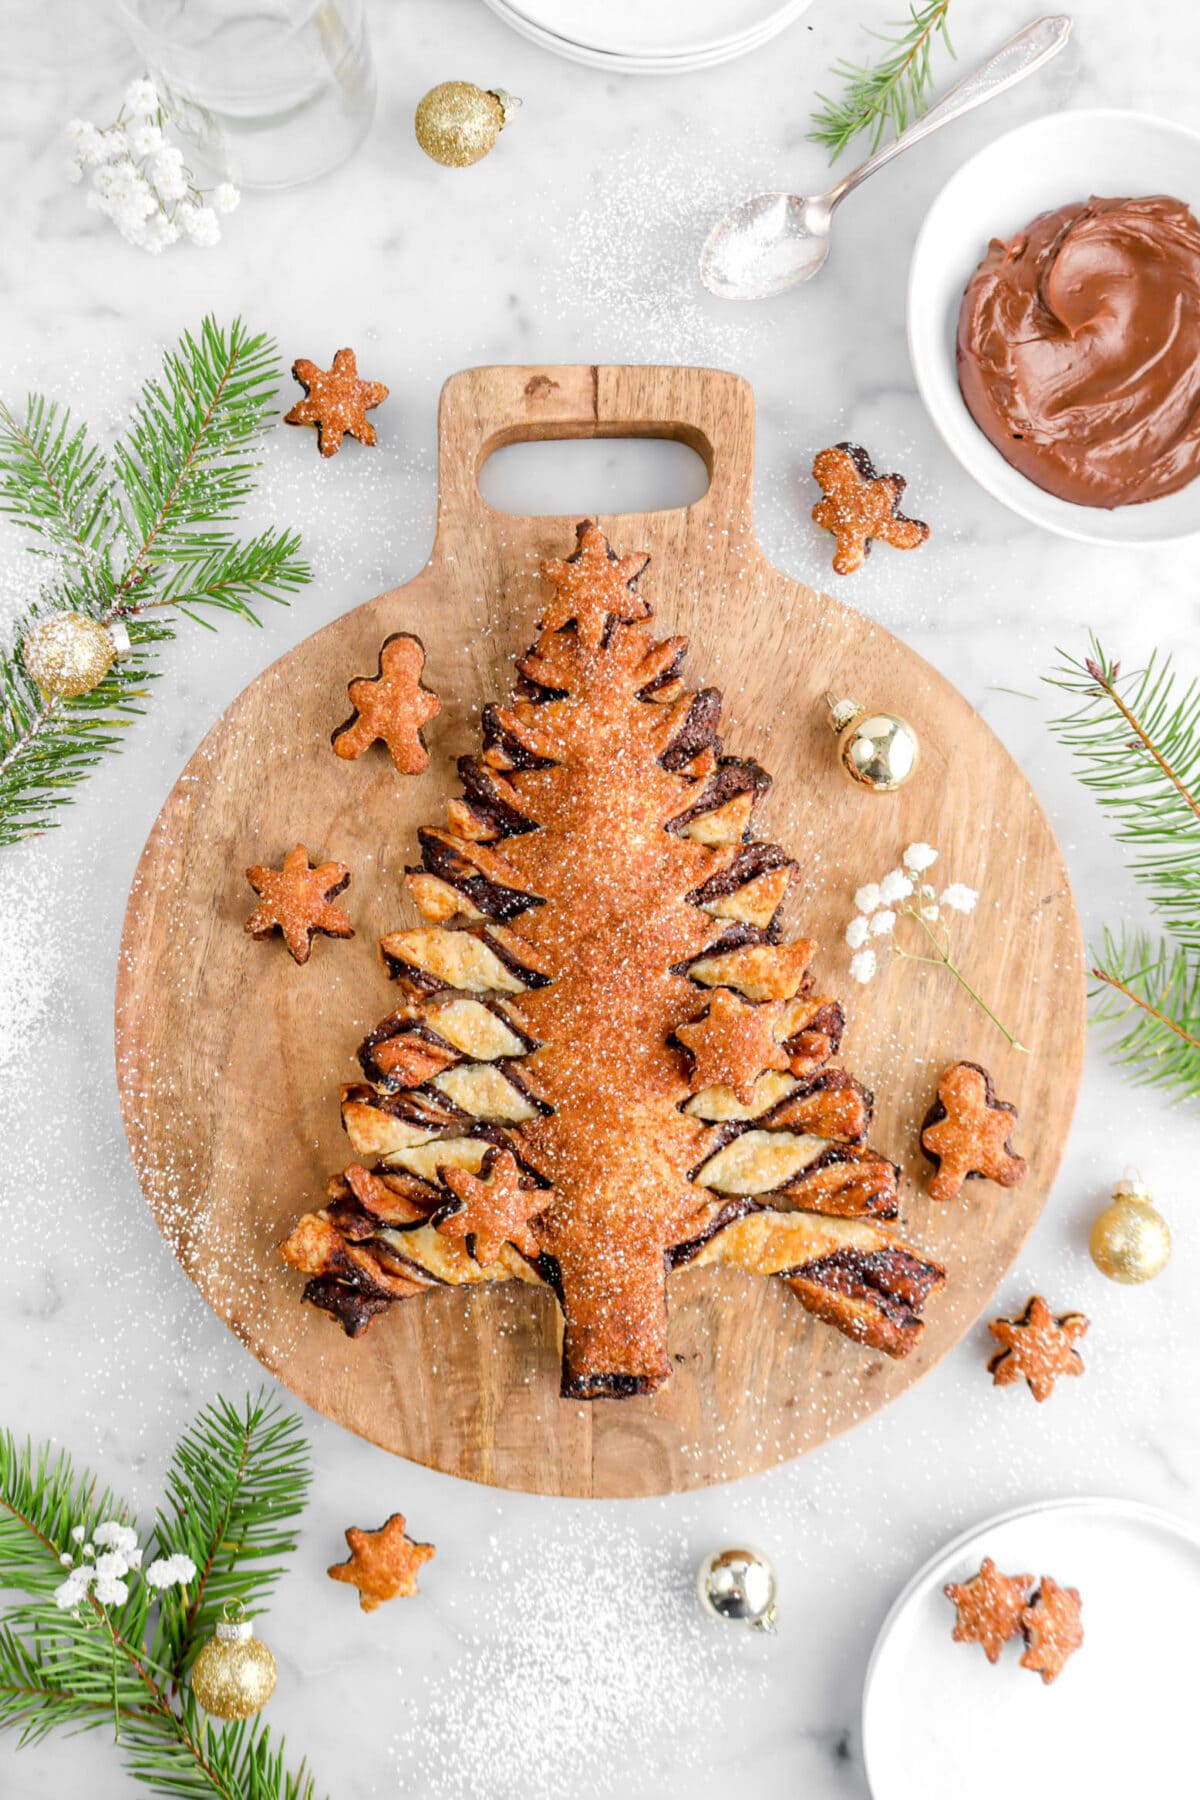 Chocolate Ganache Filled Puff Pastry Christmas Tree Tear and Share